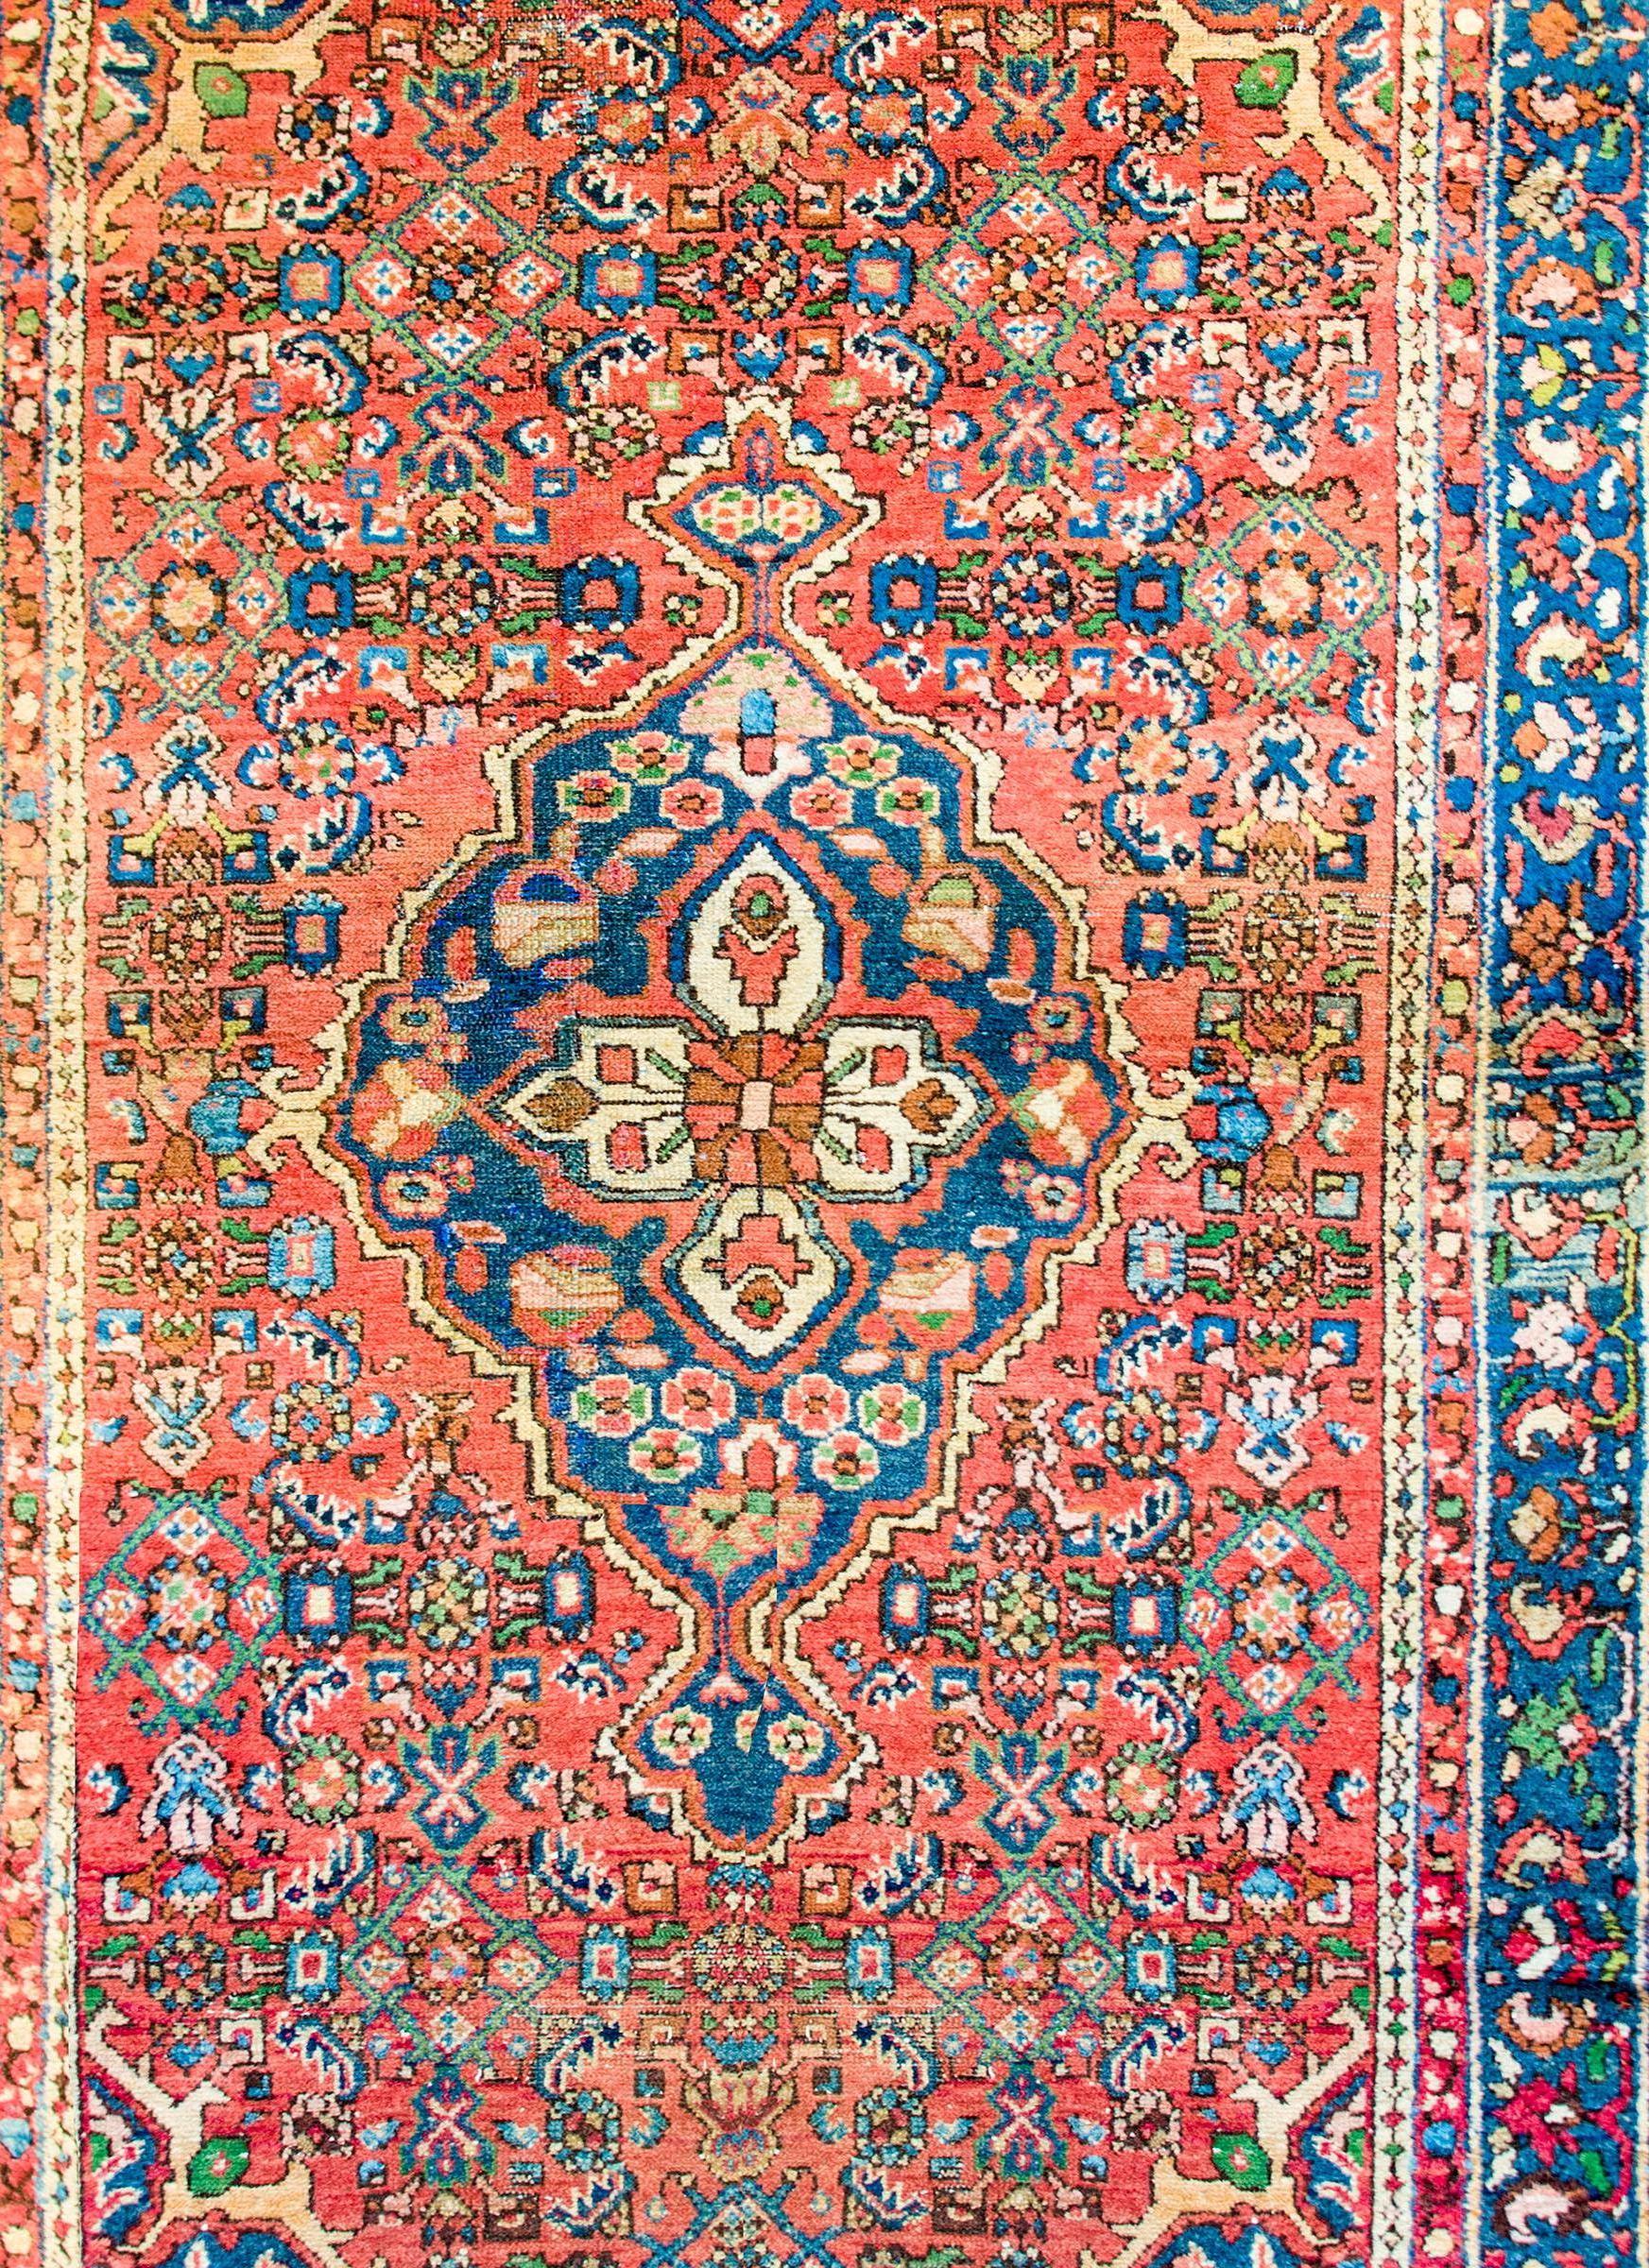 A beautiful early 20th century Persian Malayer rug with a large central diamond floral medallion with myriad flowers woven in crimson, indigo, green, gold, and black vegetable dyed wool on a crimsons field of additional myriad flowers. The border is